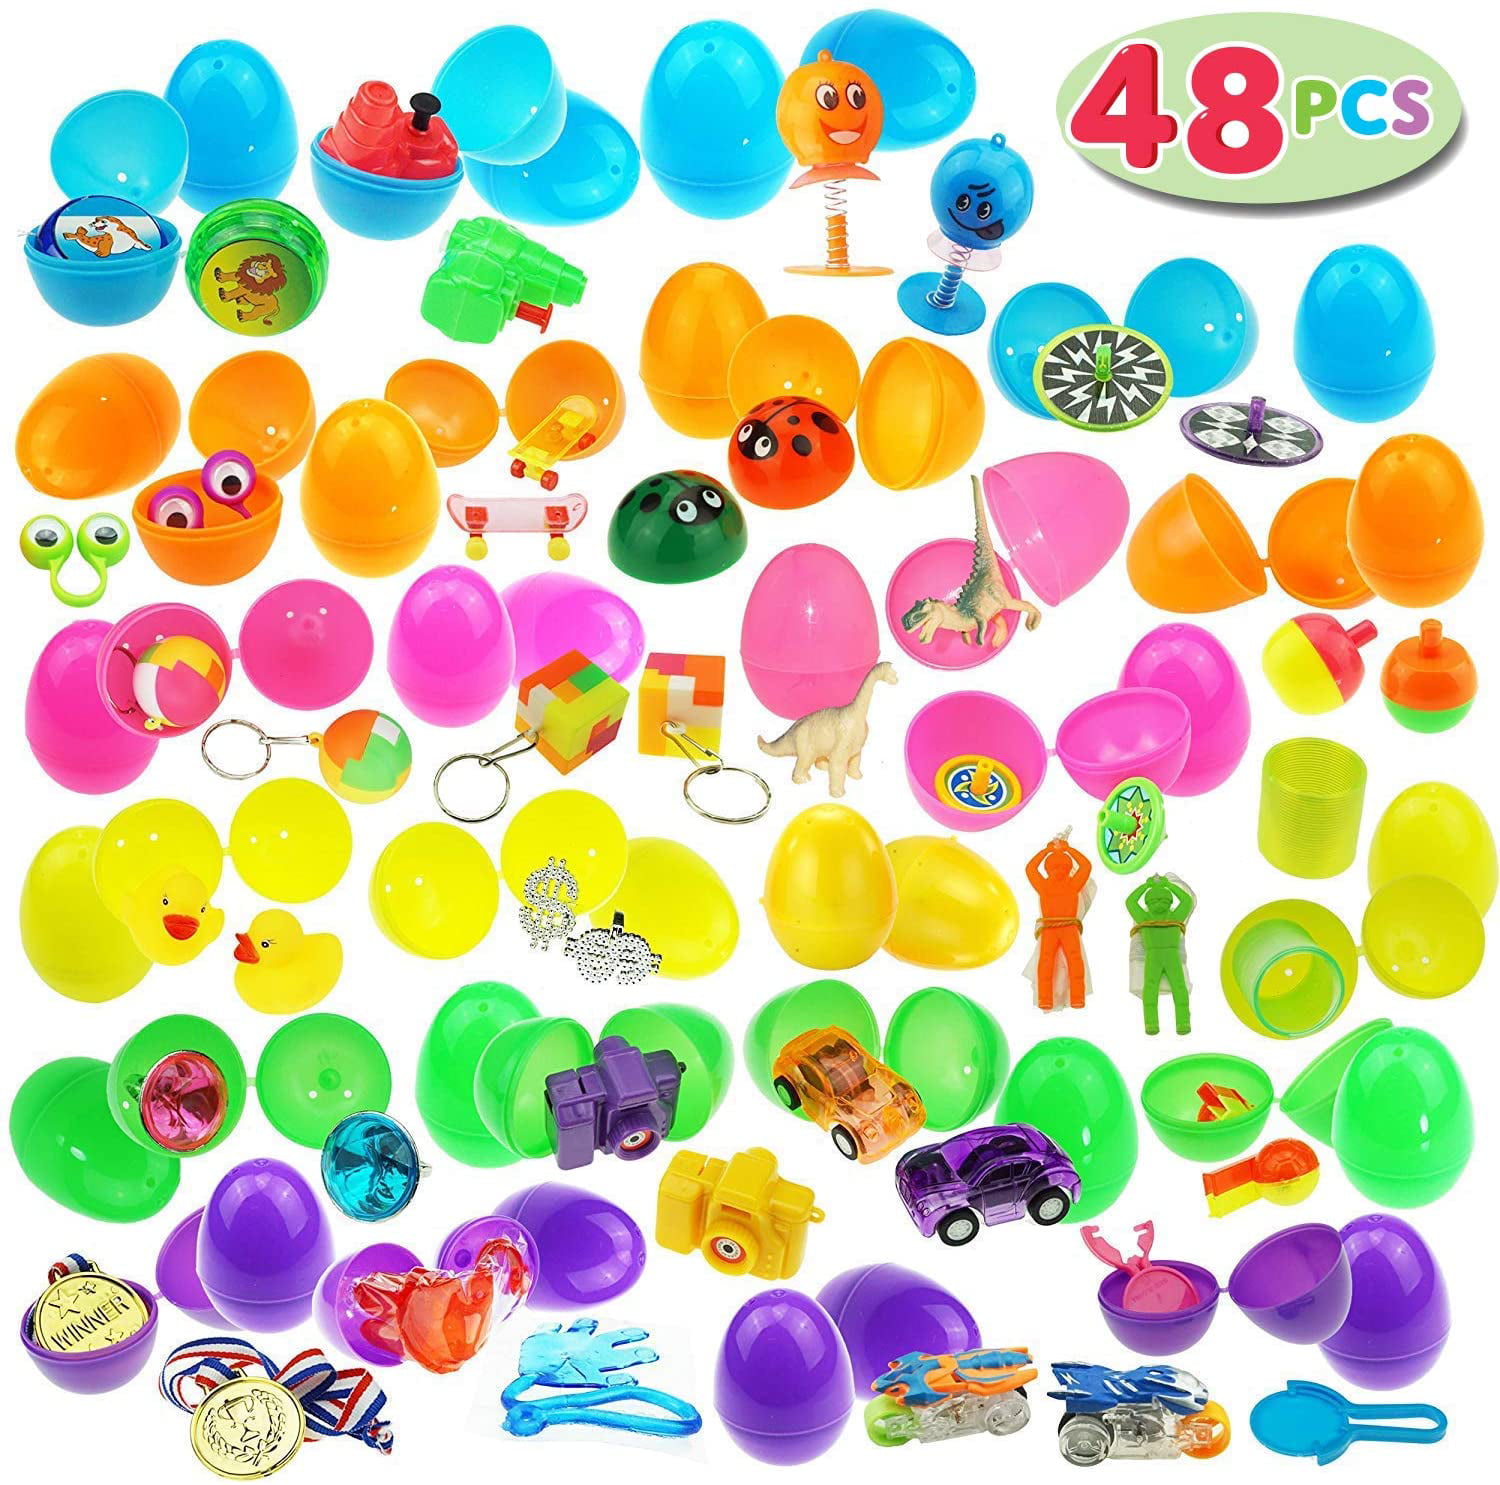 COLOFALLA 12pcs Animal Toys and Easter Eggs Plastic Surprise Eggs Not Pre-Filled Soft Toys Easter Mini Gift for Kids Easter Egg Fillers Hunt Party Favors